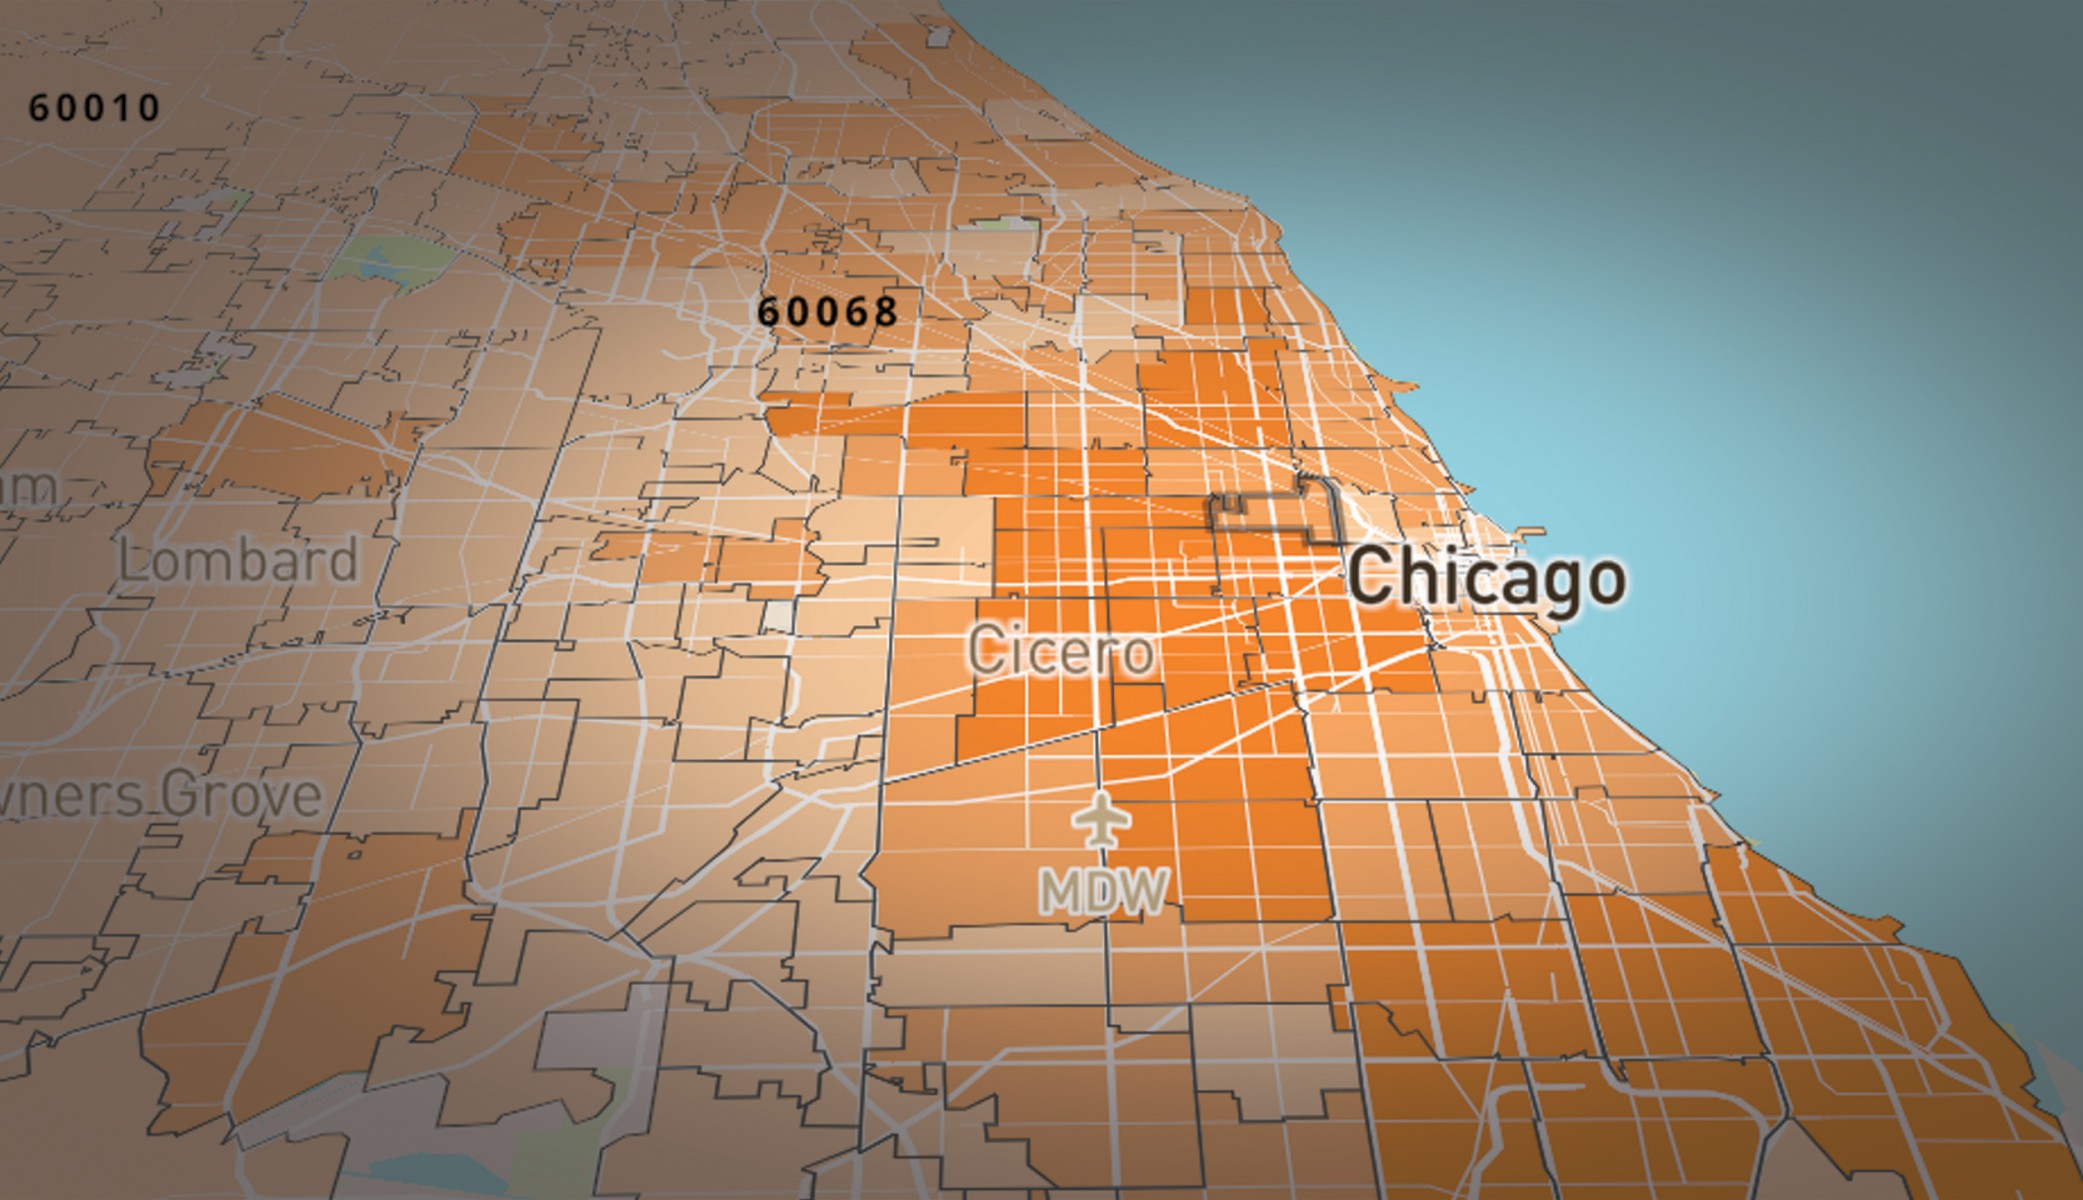 chicago il zip code map Map By Zip Code Of Coronavirus Covid 19 Cases Illinois Wbez Chicago chicago il zip code map